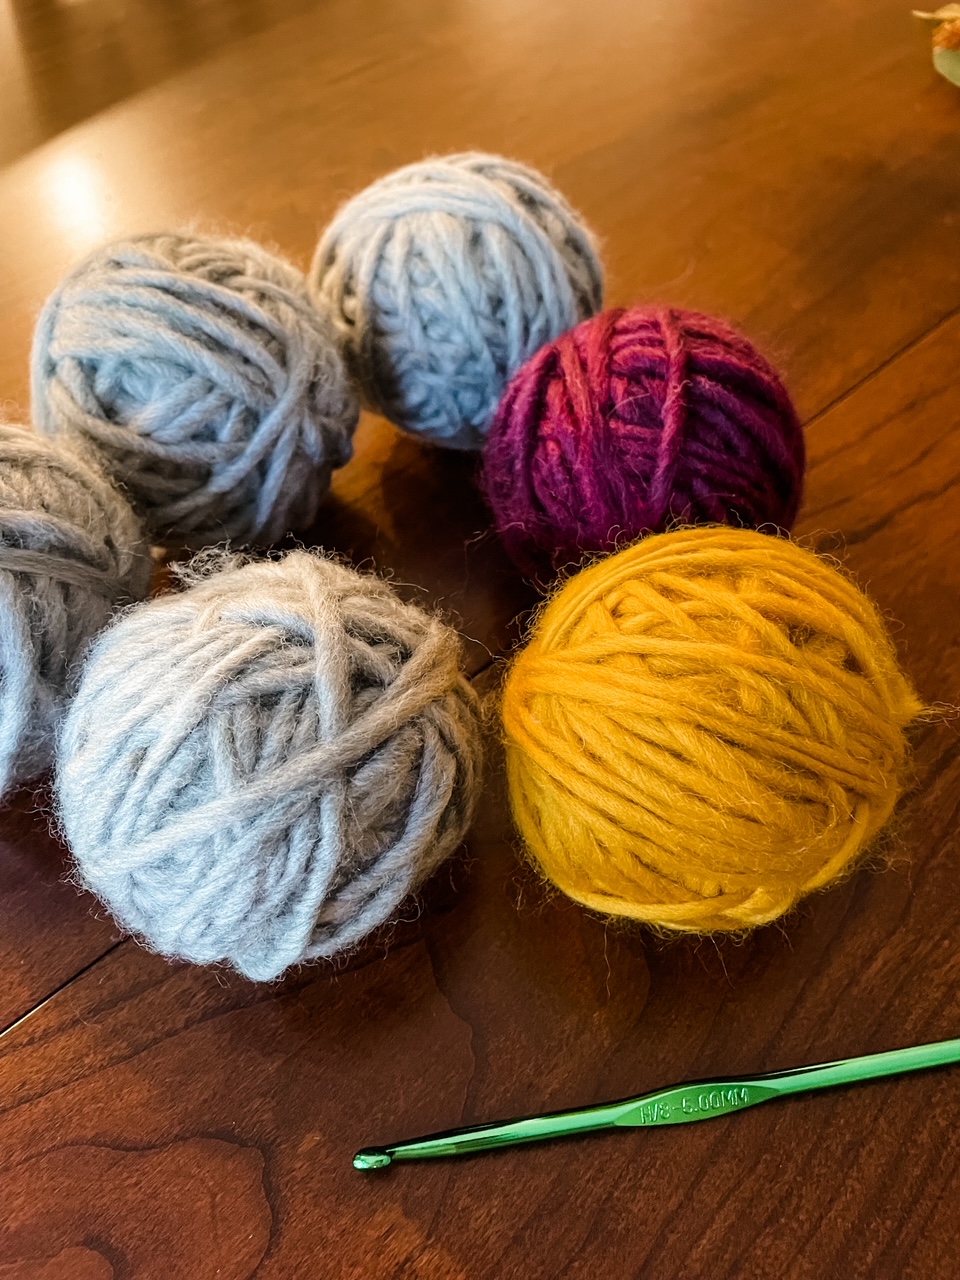 Six of the DIY Yarn Dryer Balls placed on a table with a crochet hook